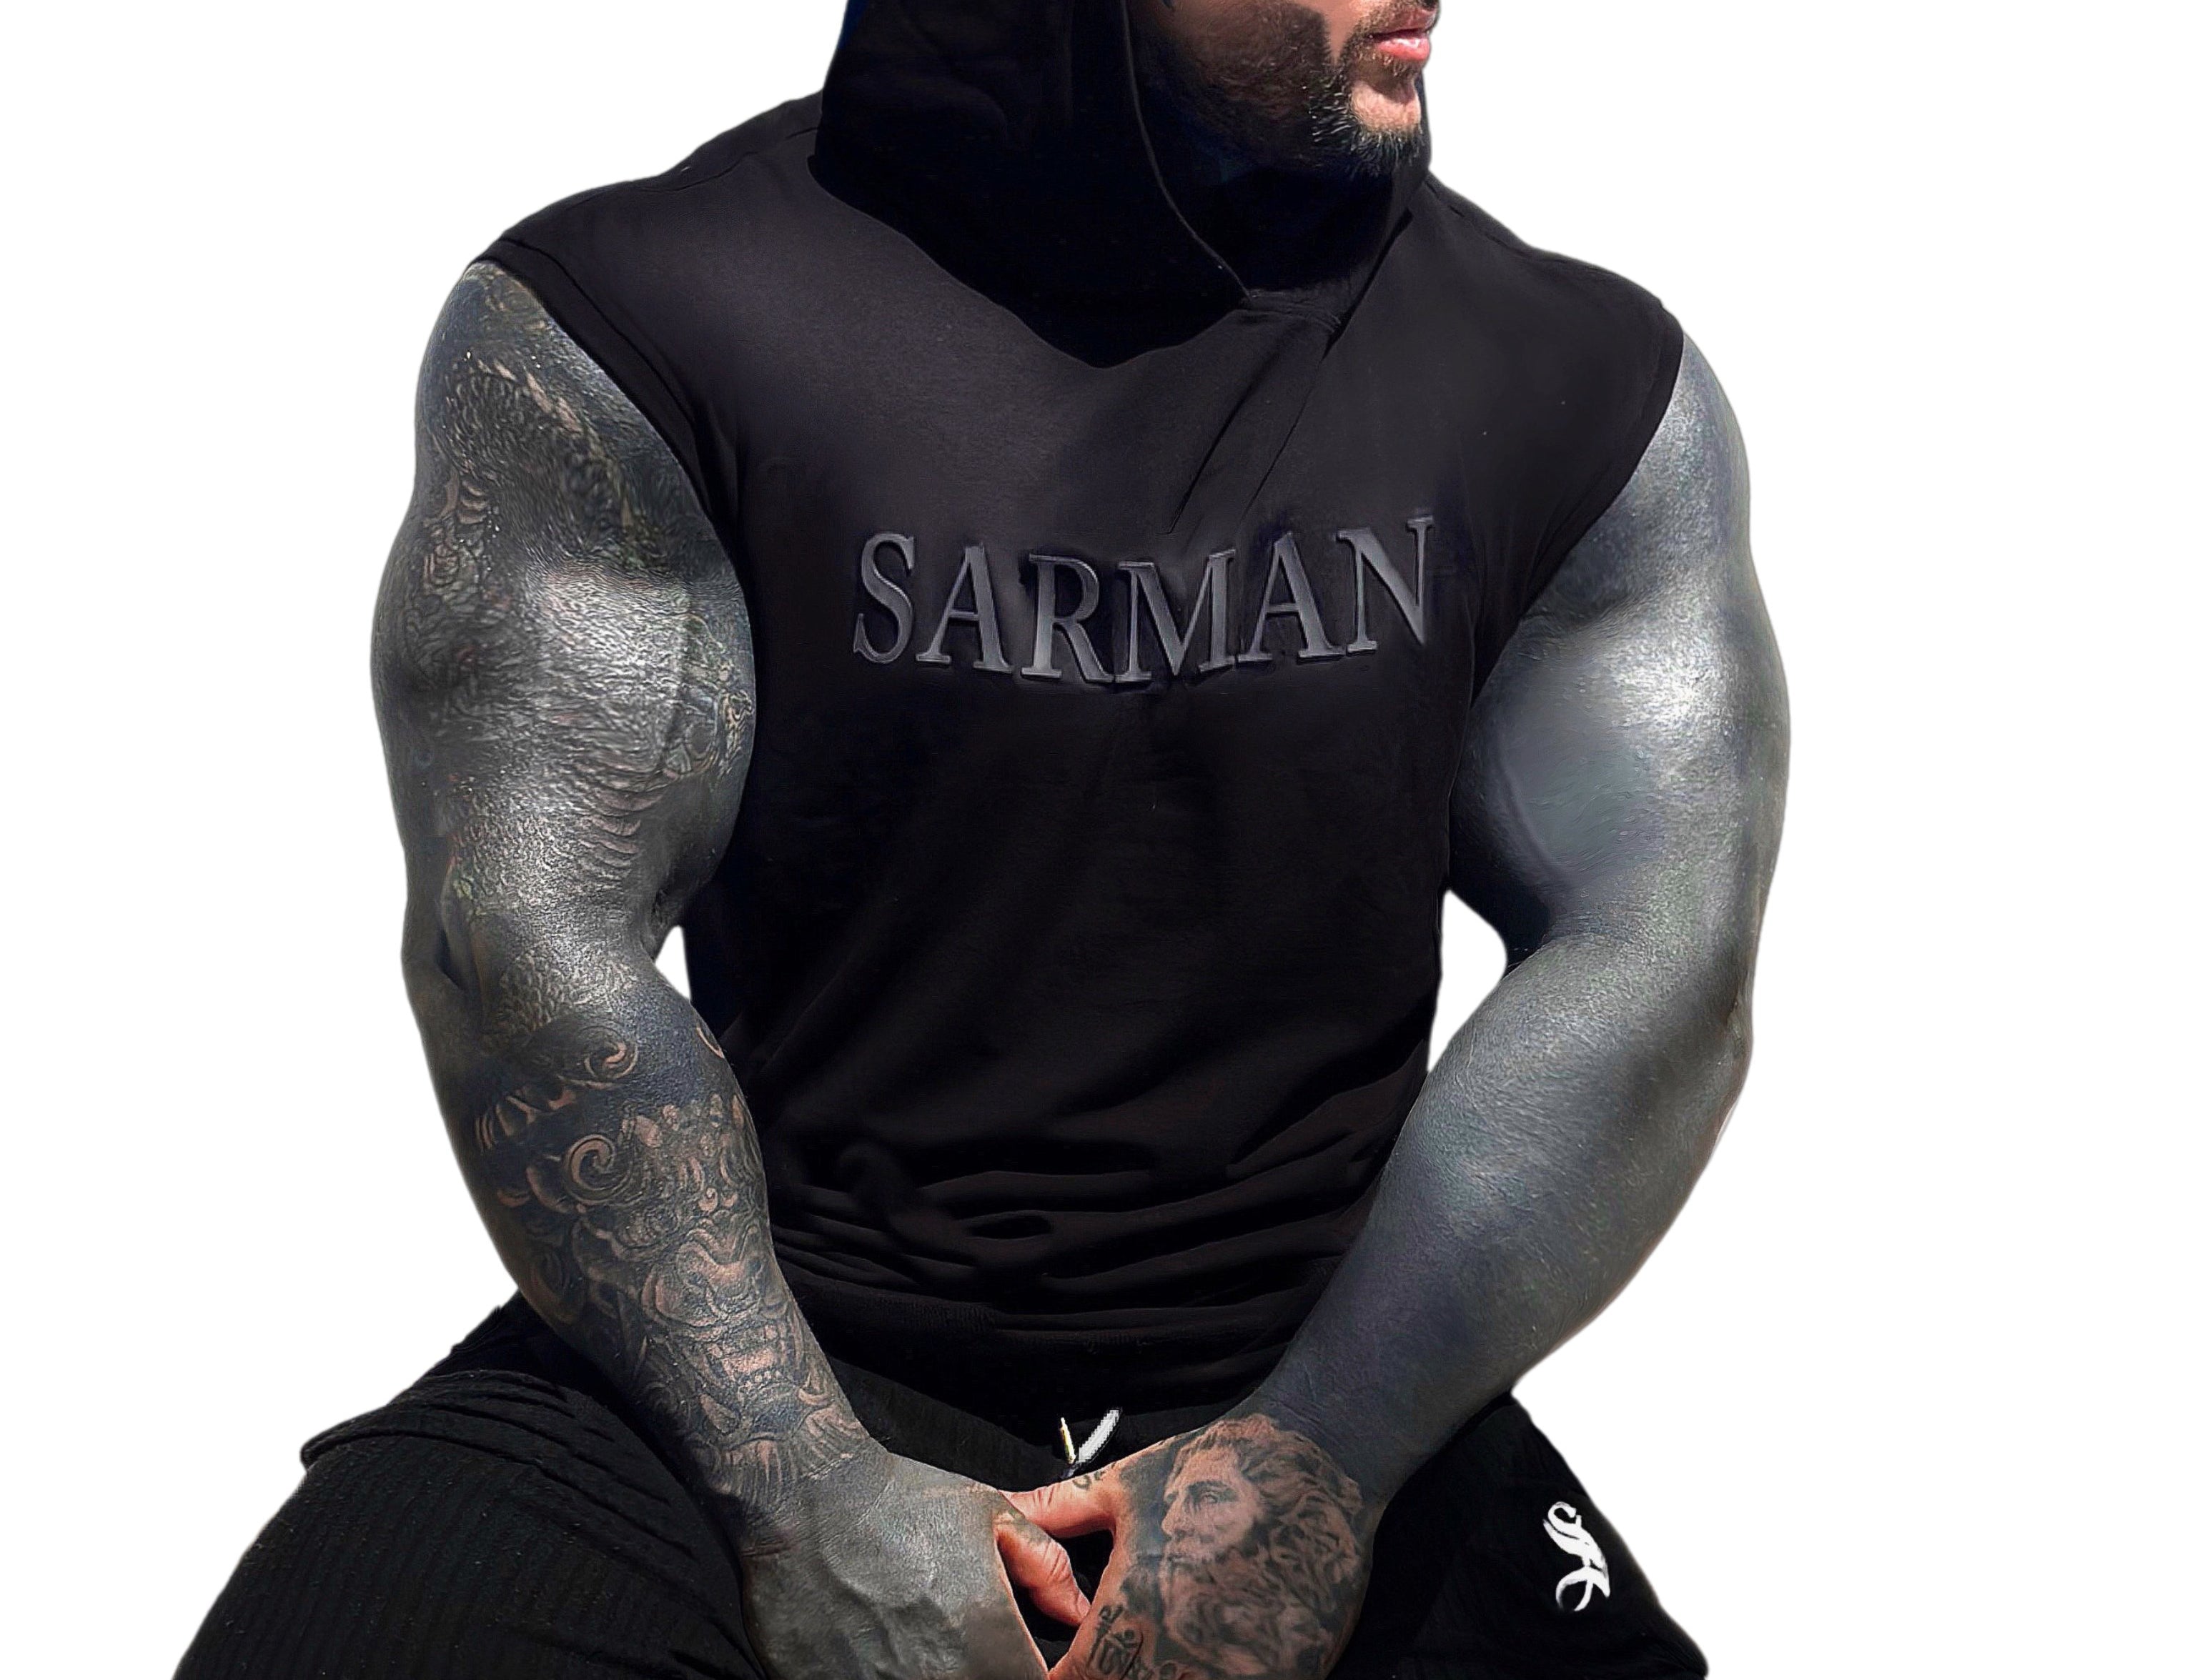 Lumber - Black T-shirt for Men - Sarman Fashion - Wholesale Clothing Fashion Brand for Men from Canada